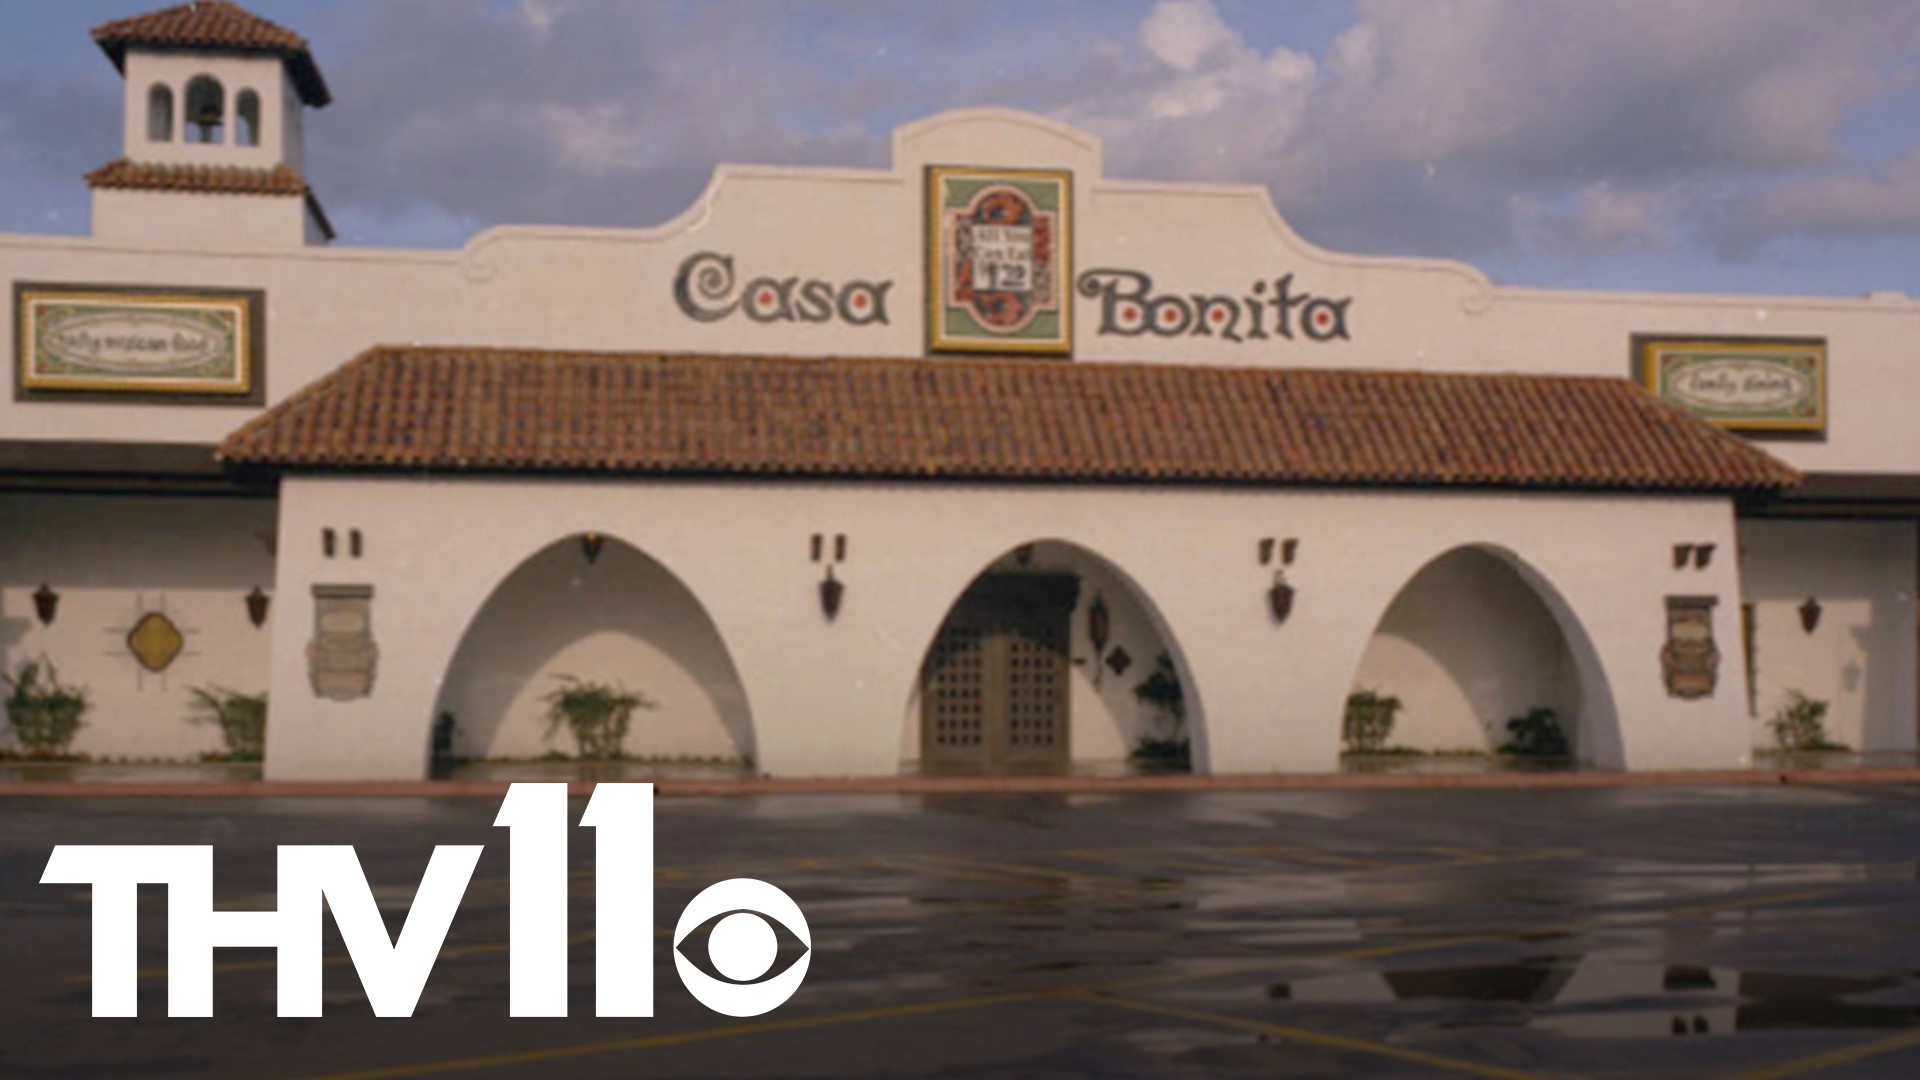 The final Denver location is getting purchased by the creators of South Park, so now people are hoping Casa Bonita could open again in Arkansas!